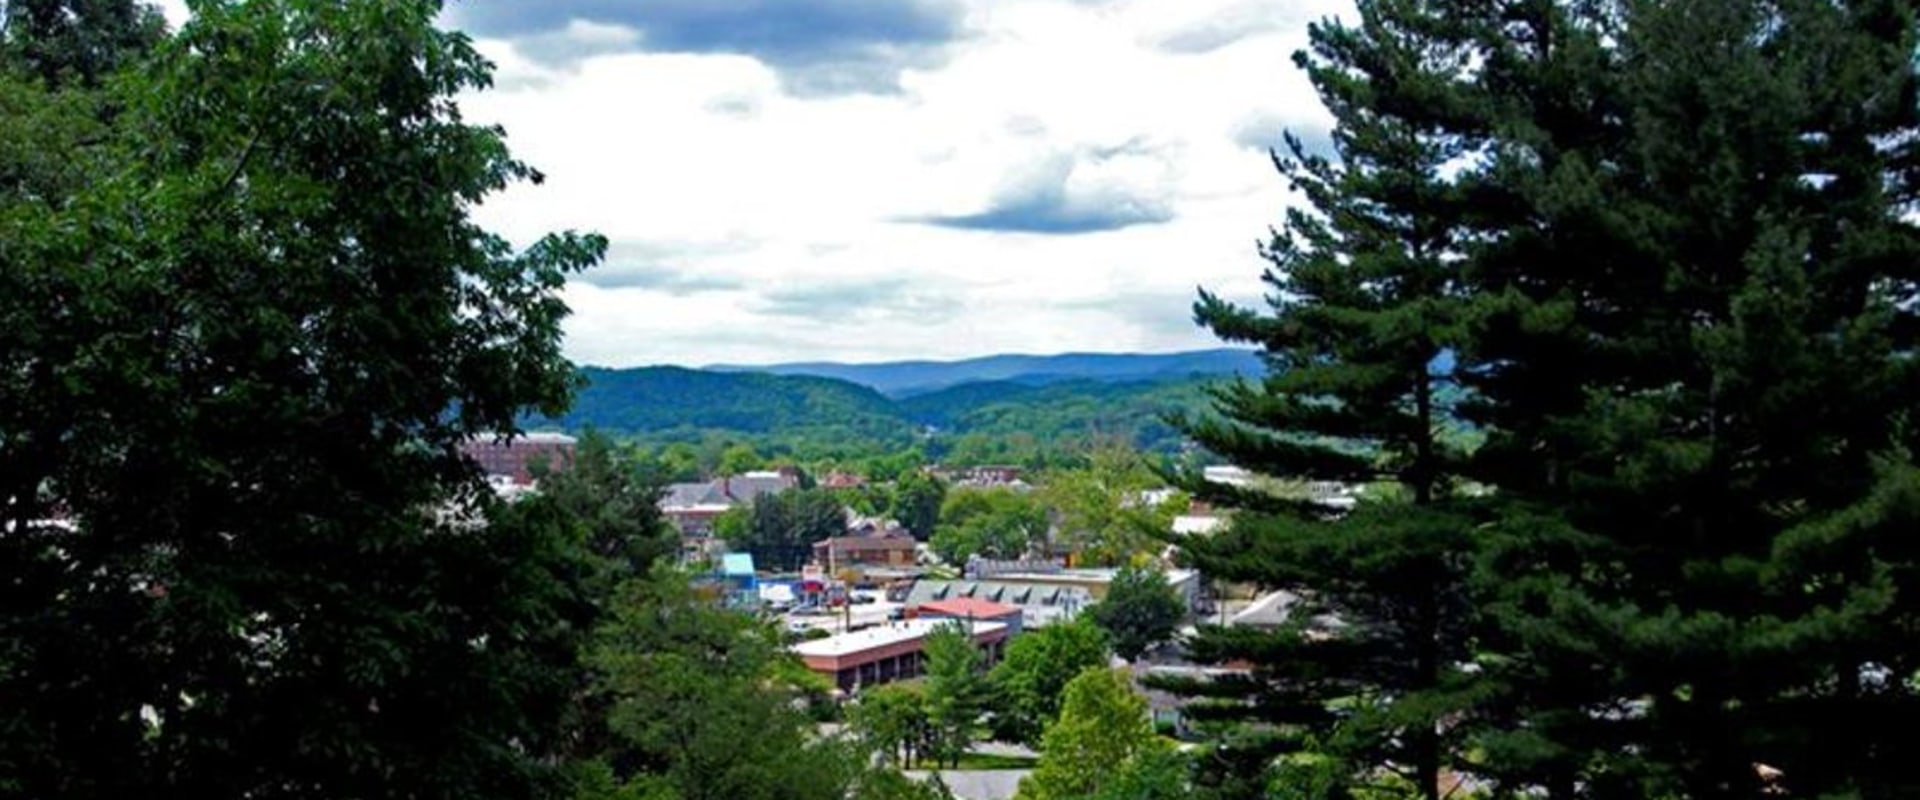 Attracting and Retaining Businesses in the Eastern Panhandle of West Virginia